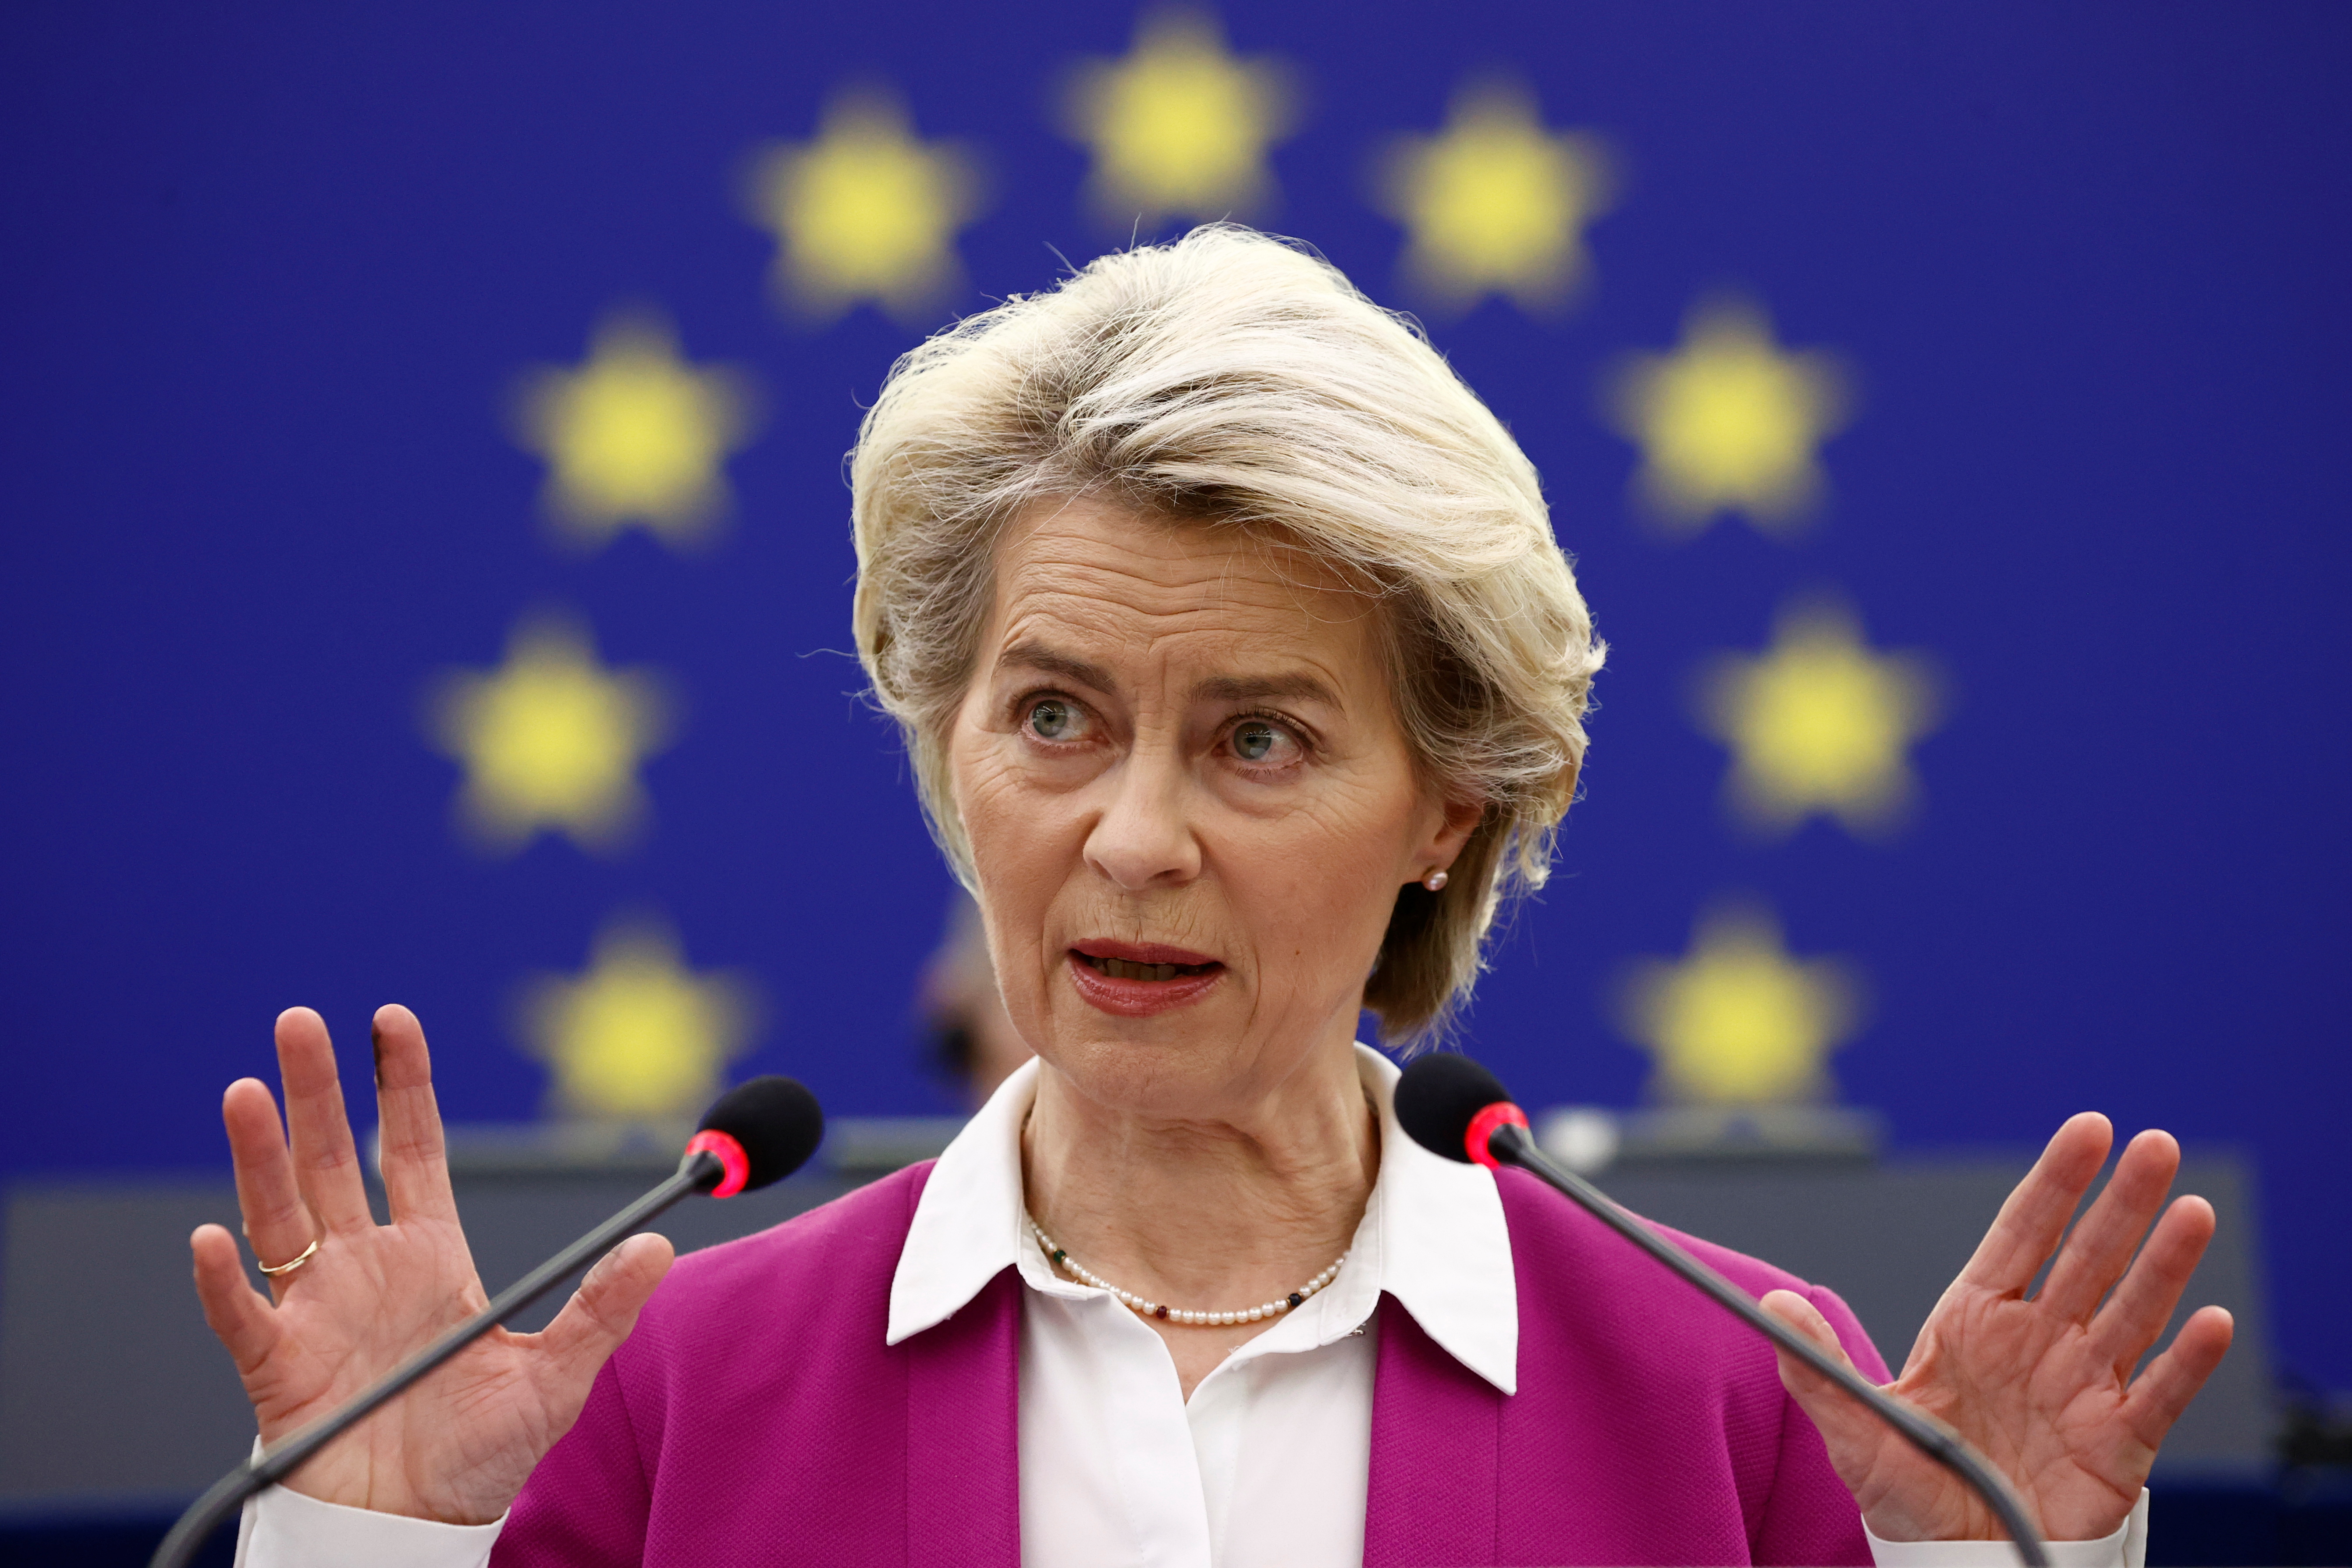 European Commission President Ursula von der Leyen addresses EU parliament on the conclusions of the October leaders' summit in Strasbourg, France, November 23, 2021. REUTERS/Christian Hartmann/Pool